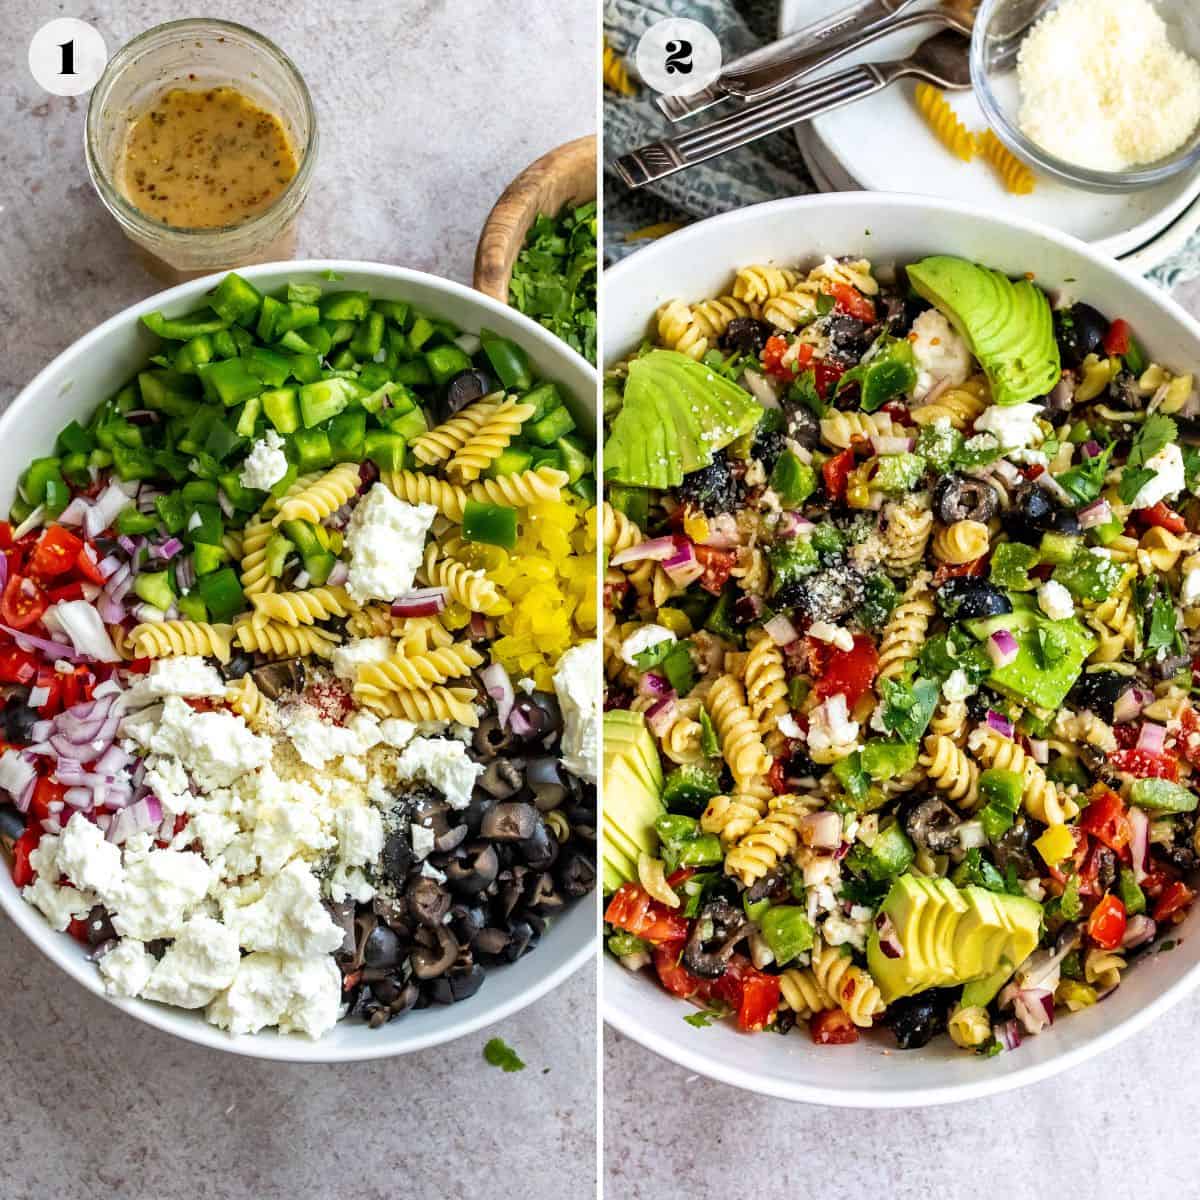 Steps to make Zesty Italian Pasta salad in a large salad bowl with toppings. 